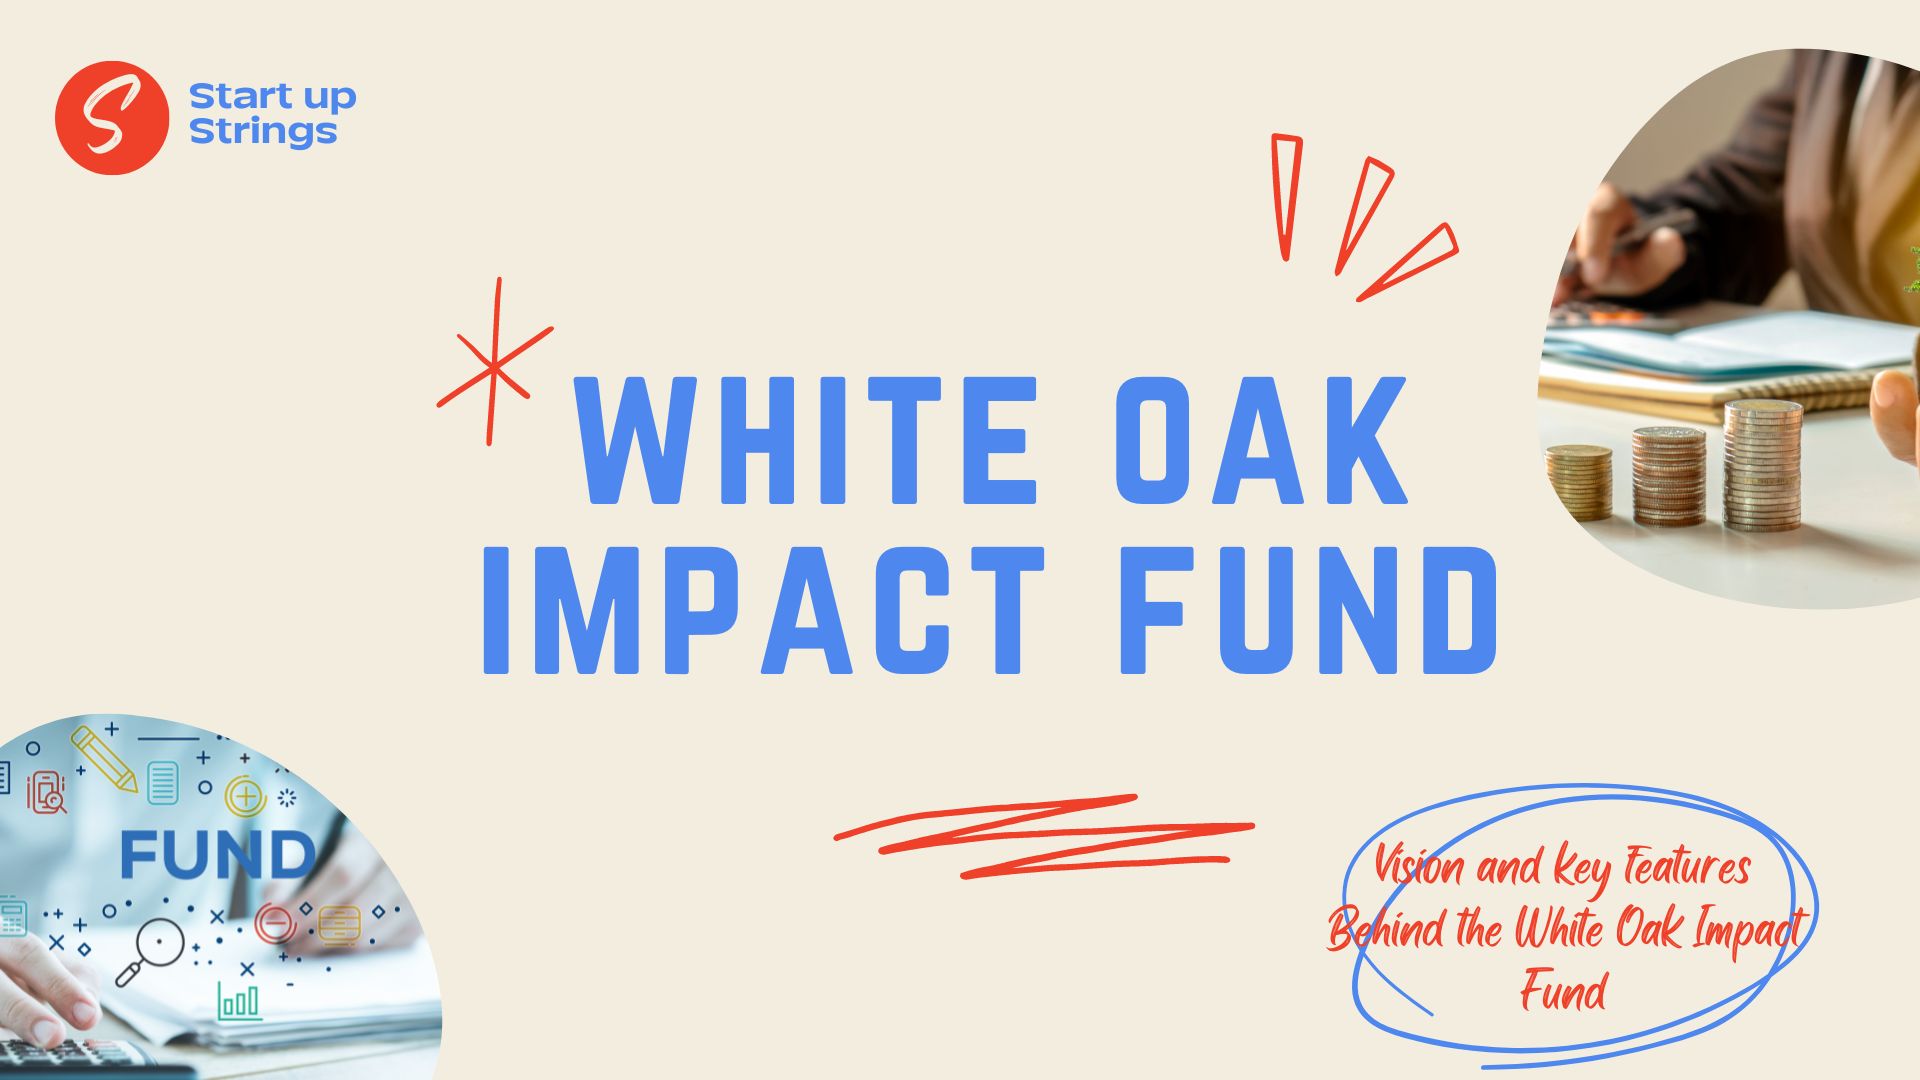 Vision Behind the White Oak Impact Fund | Startup Strings